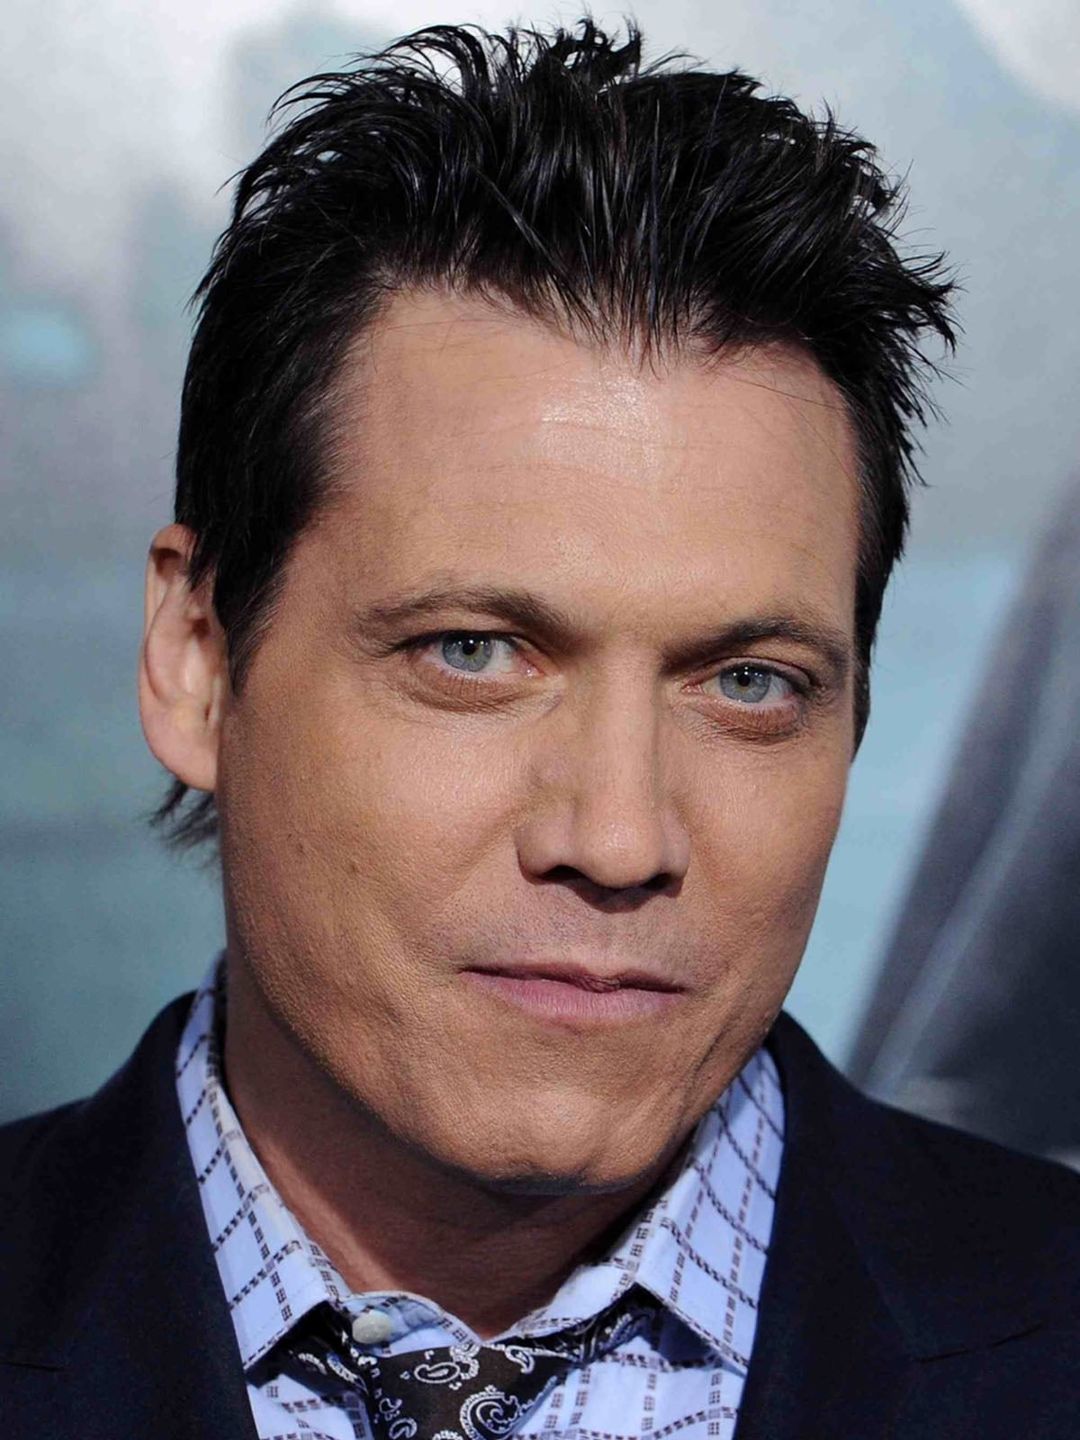 Holt McCallany personal traits